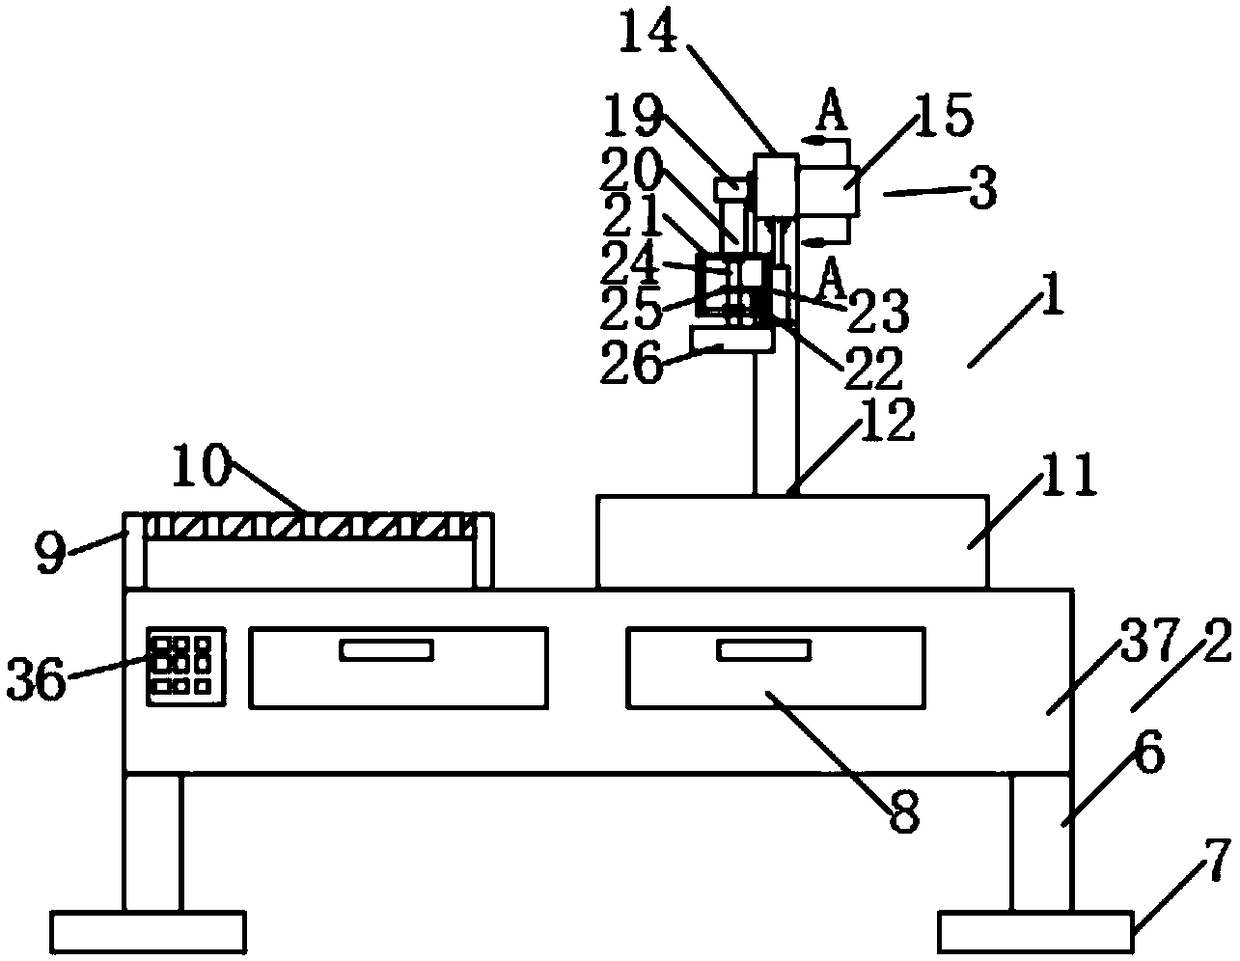 Auxiliary device for displaying cnc teaching cutters